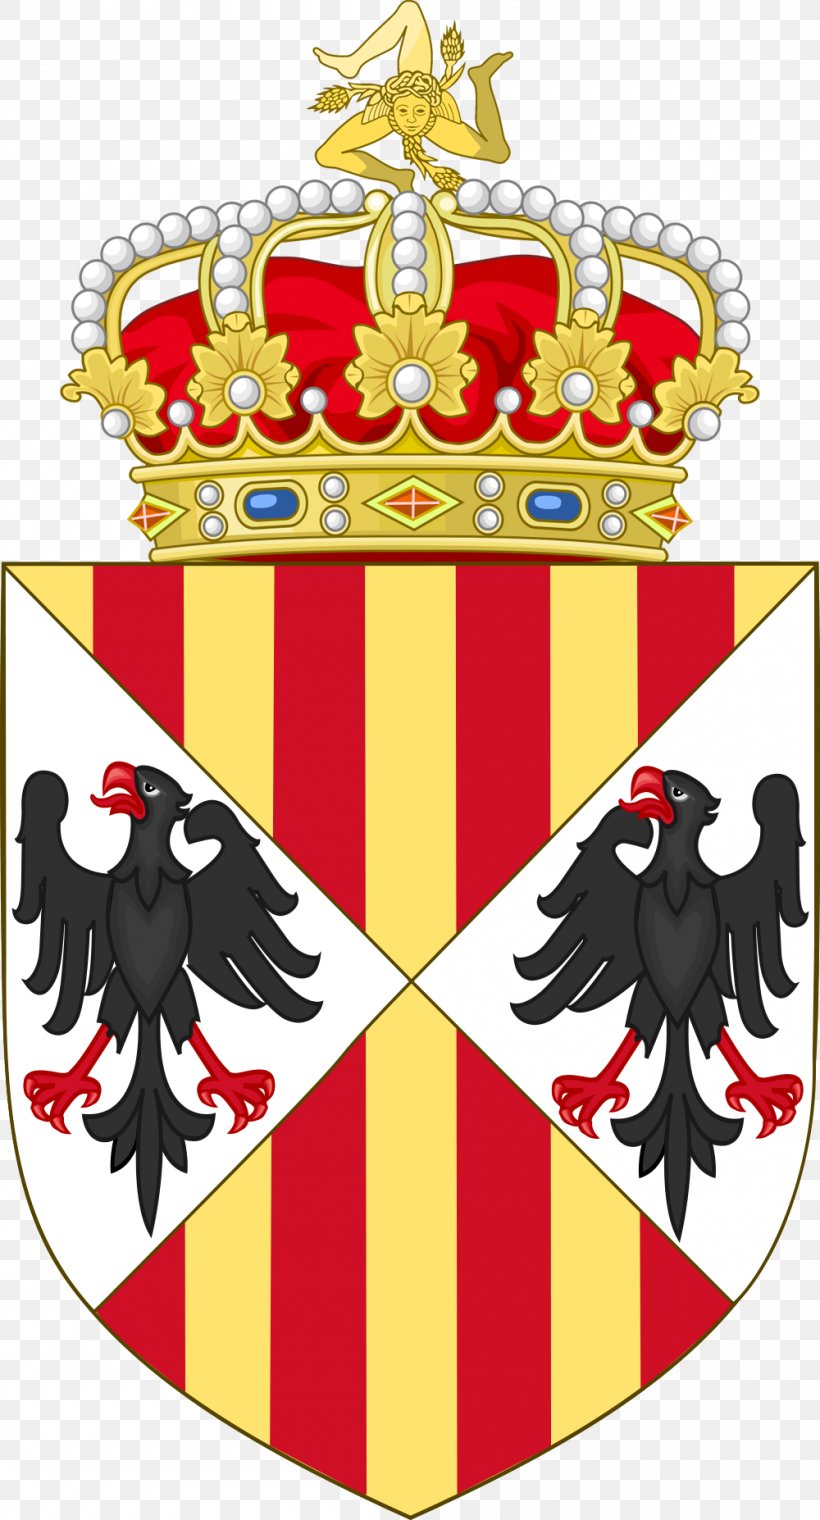 Kingdom Of Sicily Crown Of Aragon Kingdom Of Aragon Kingdom Of Naples, PNG, 1000x1854px, Kingdom Of Sicily, Charles V, Coat Of Arms, Coat Of Arms Of Spain, Crest Download Free